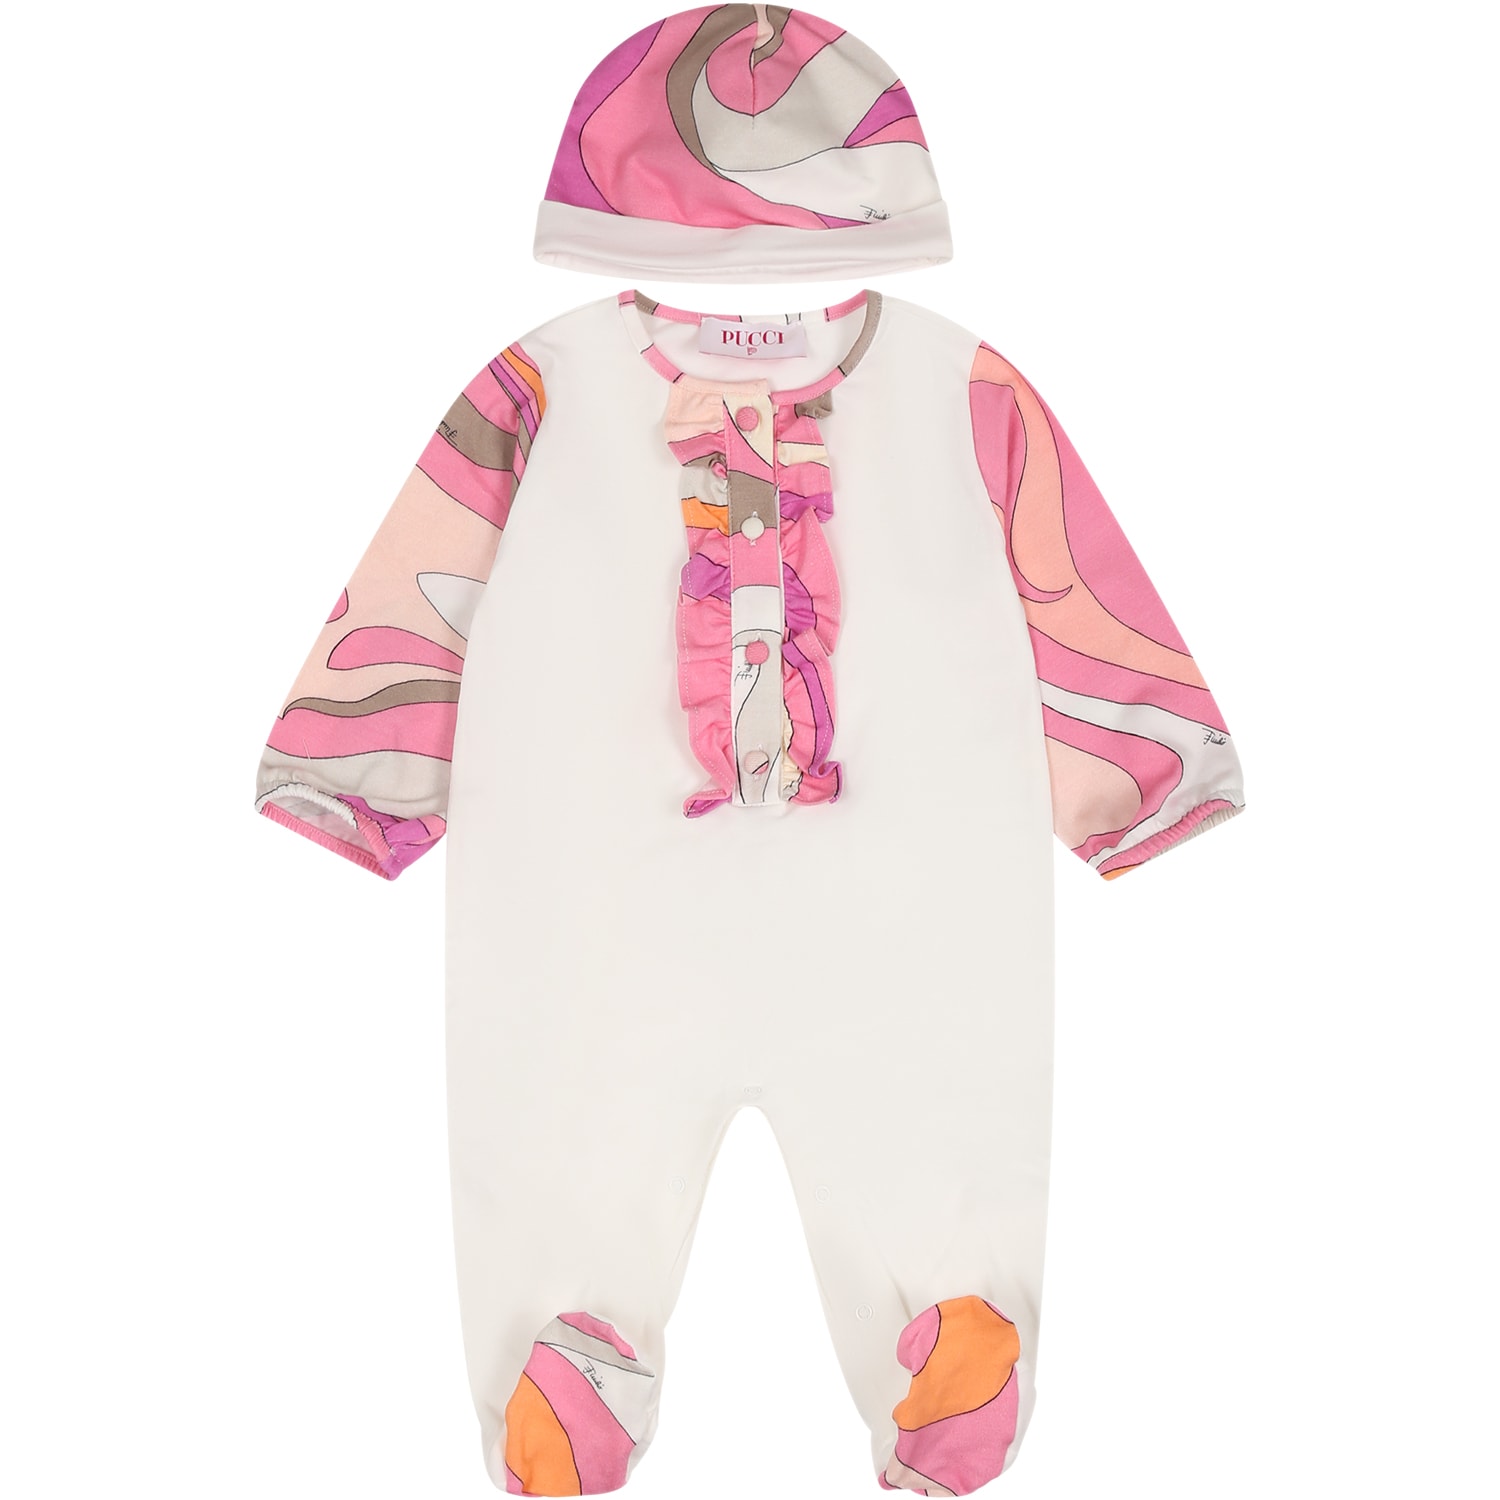 Pucci Pink Dress Fro Baby Girl With Logo And Print In White